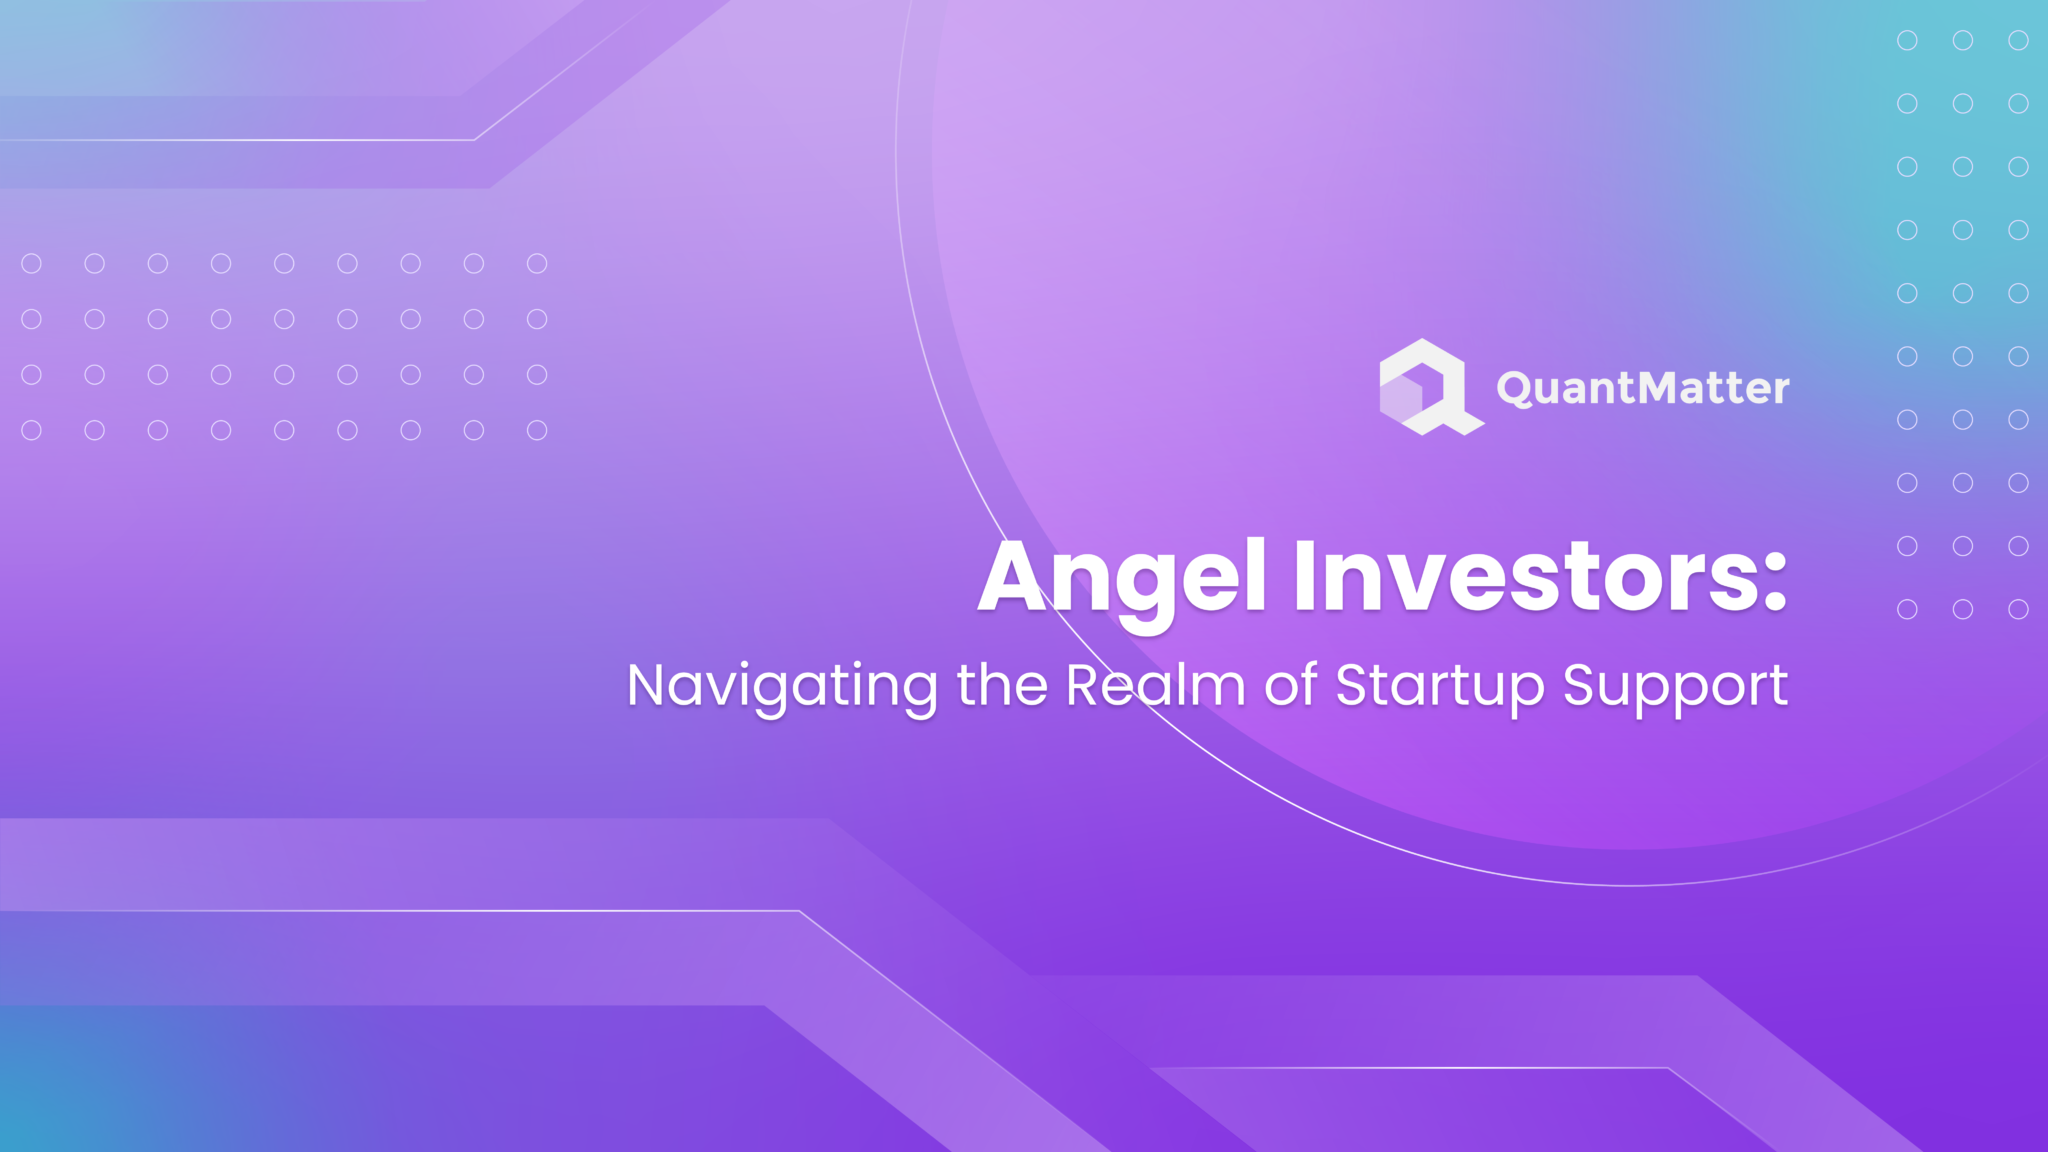 Angel Investors Navigating the Realm of Startup Support